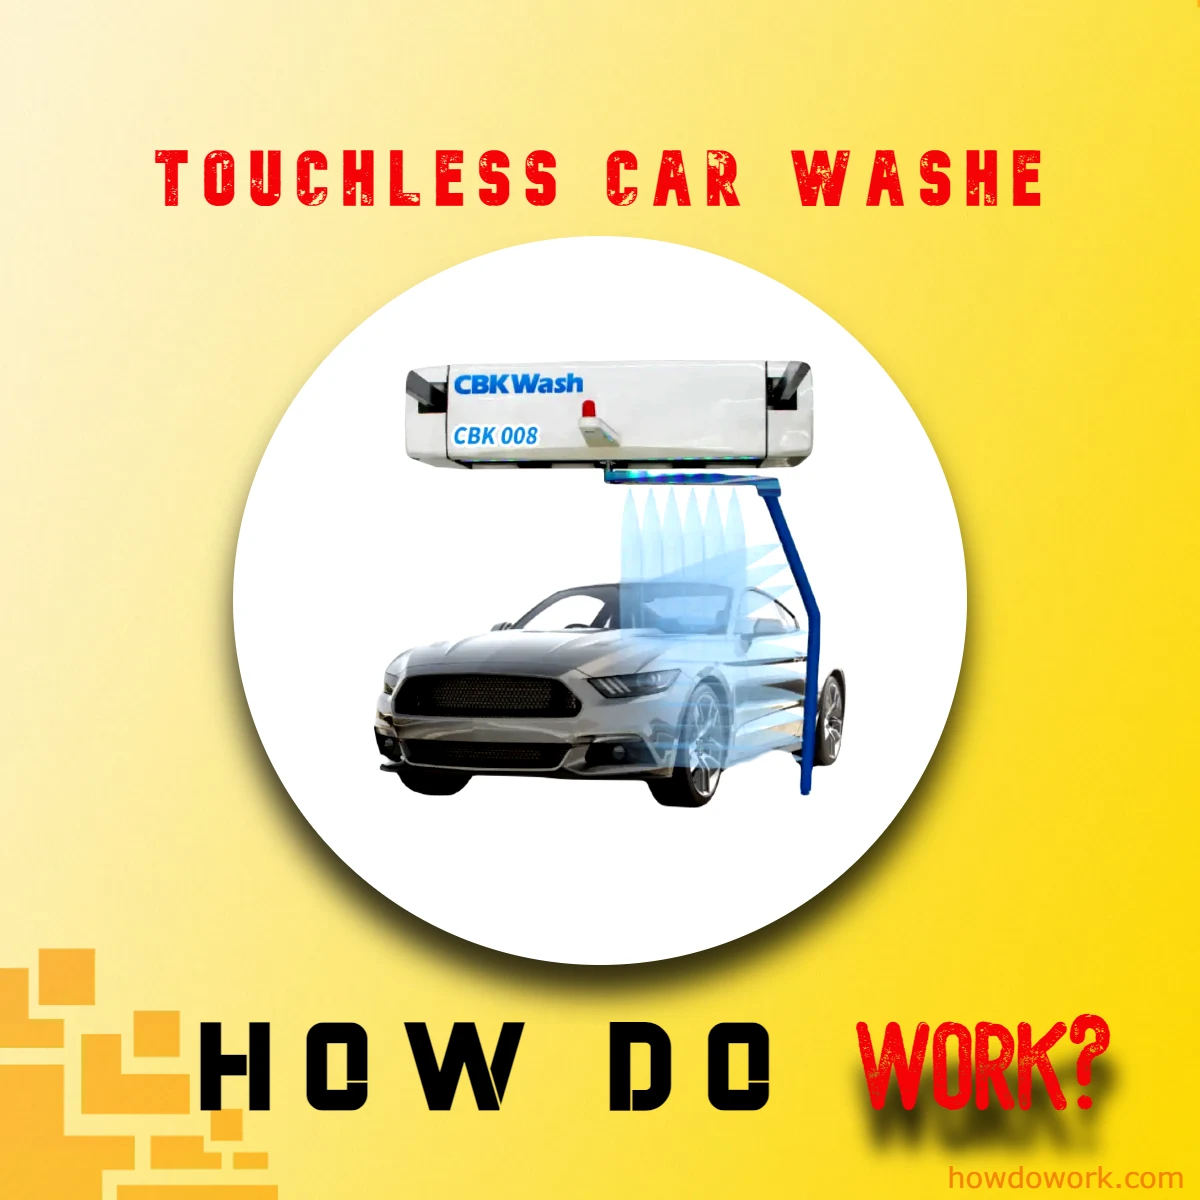 How Do Touchless Car Washes Work